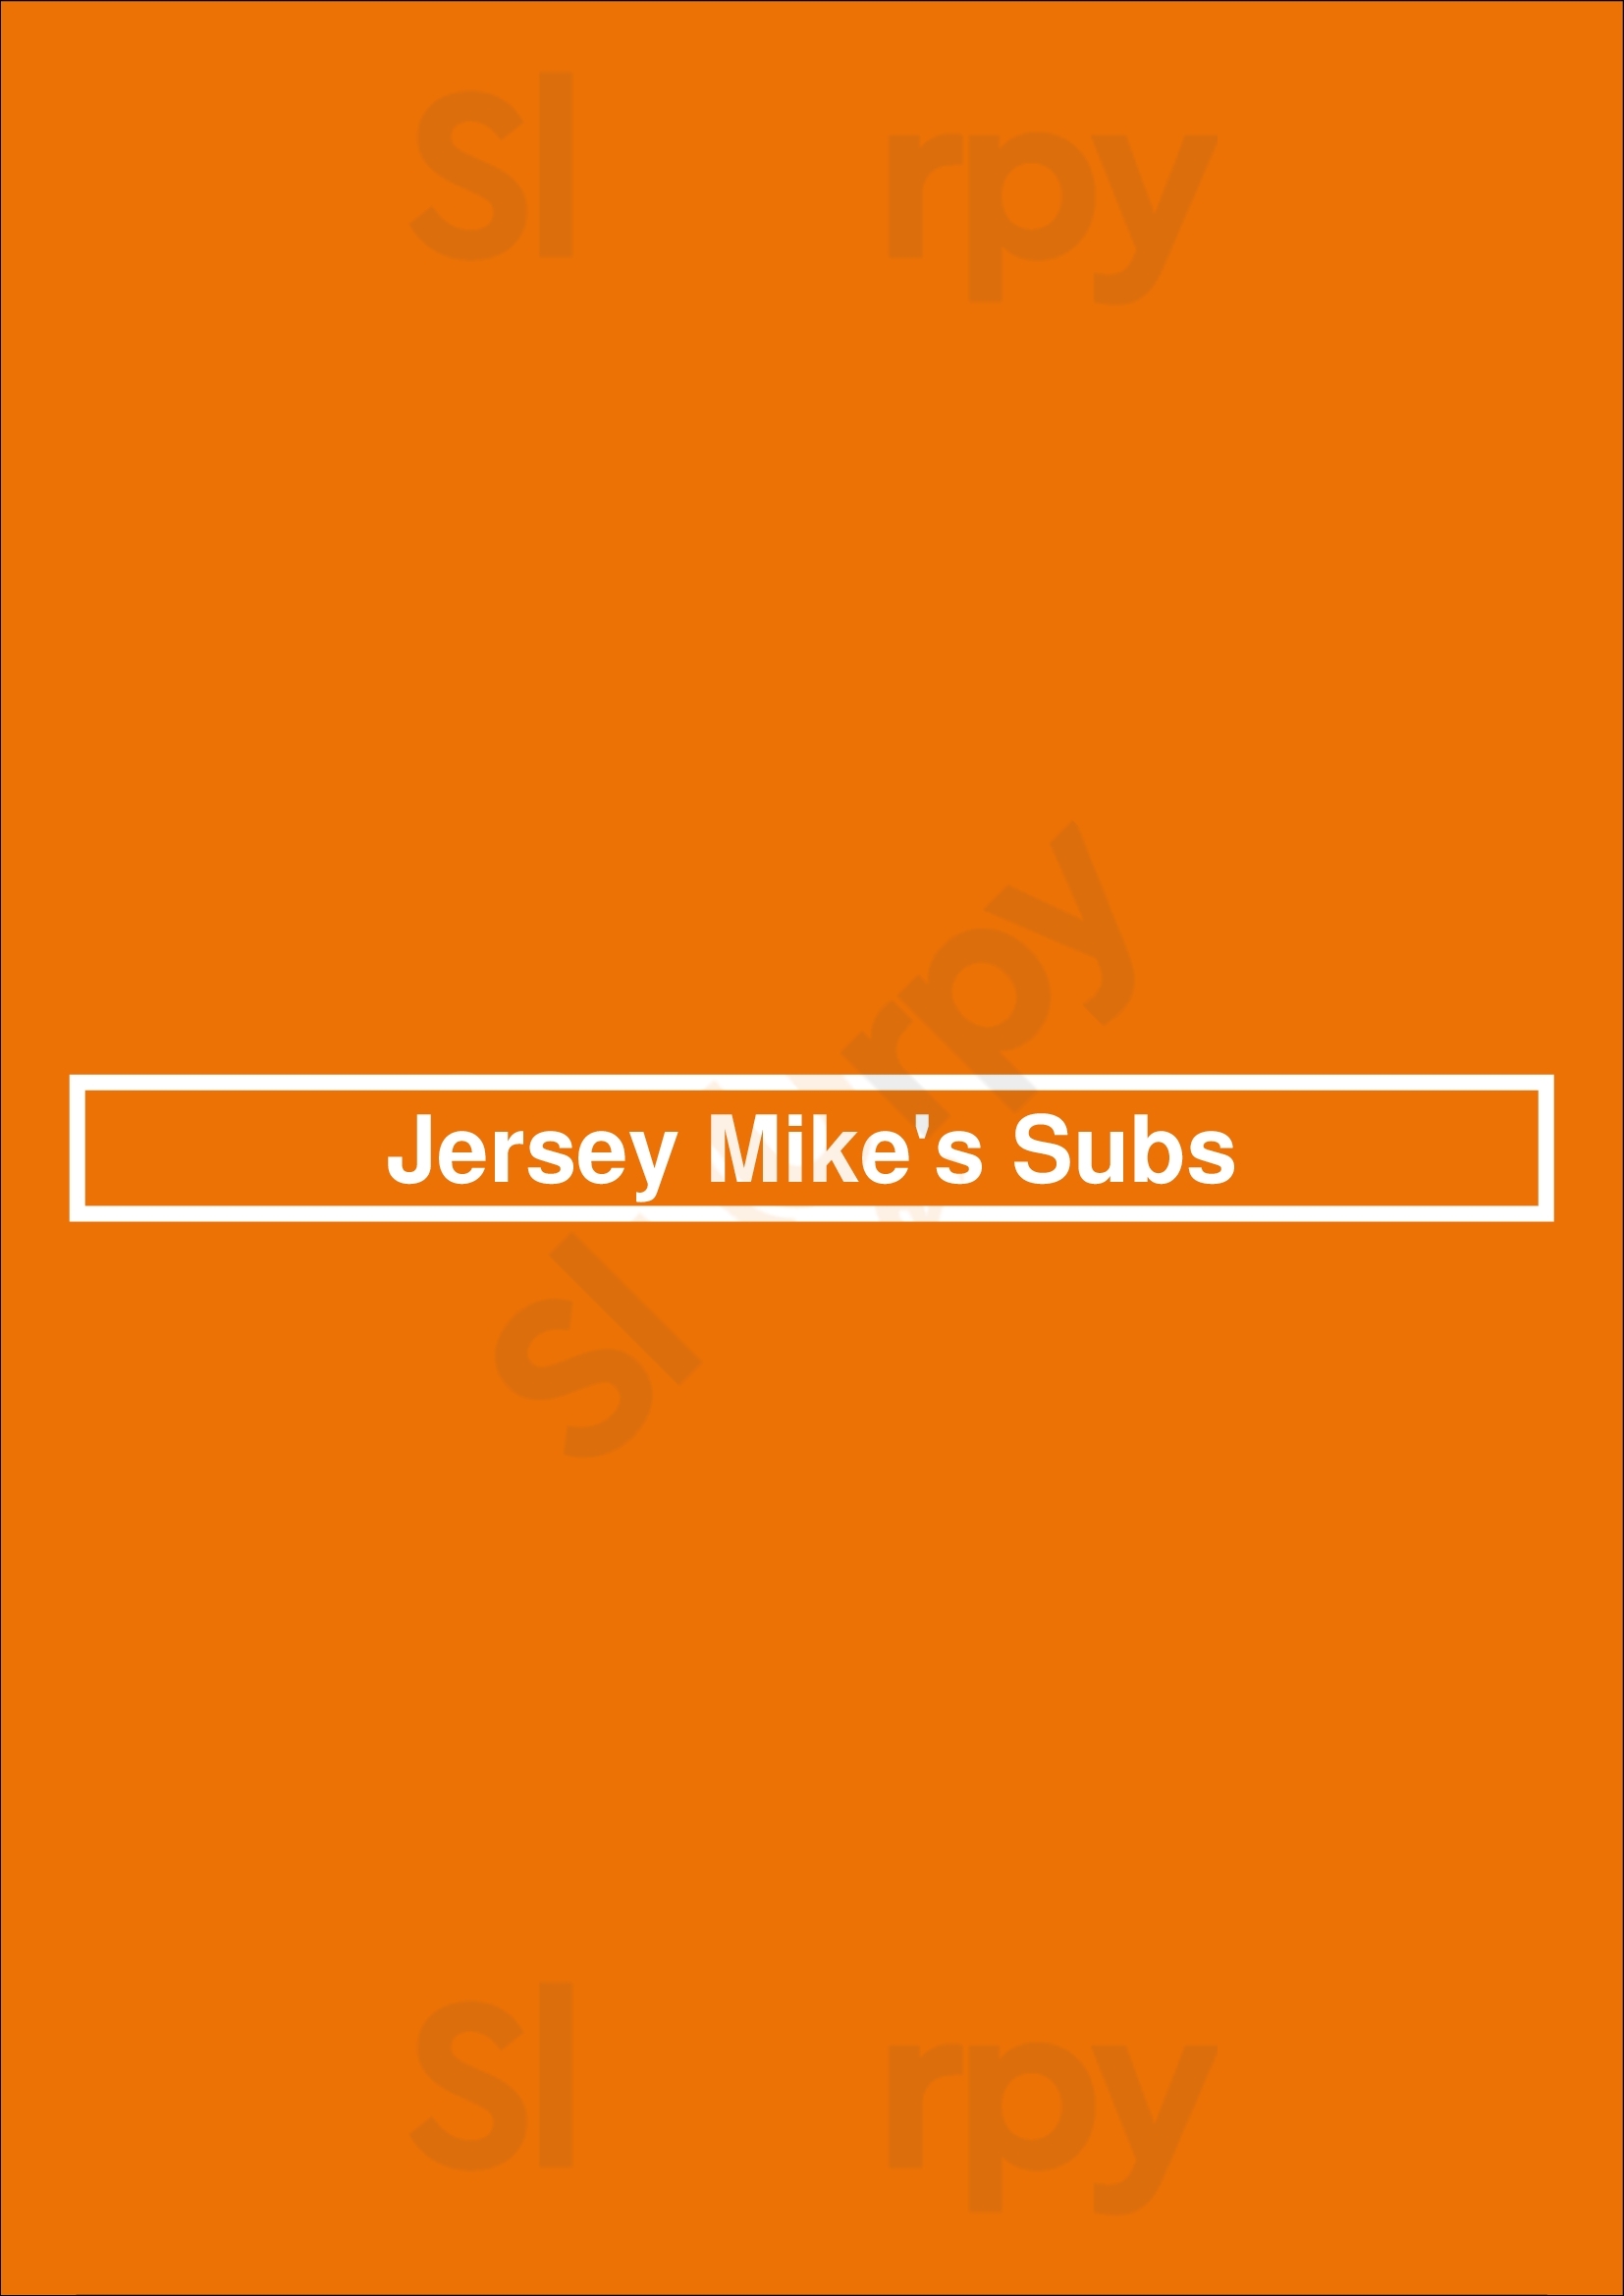 Jersey Mike's Subs Feasterville Menu - 1